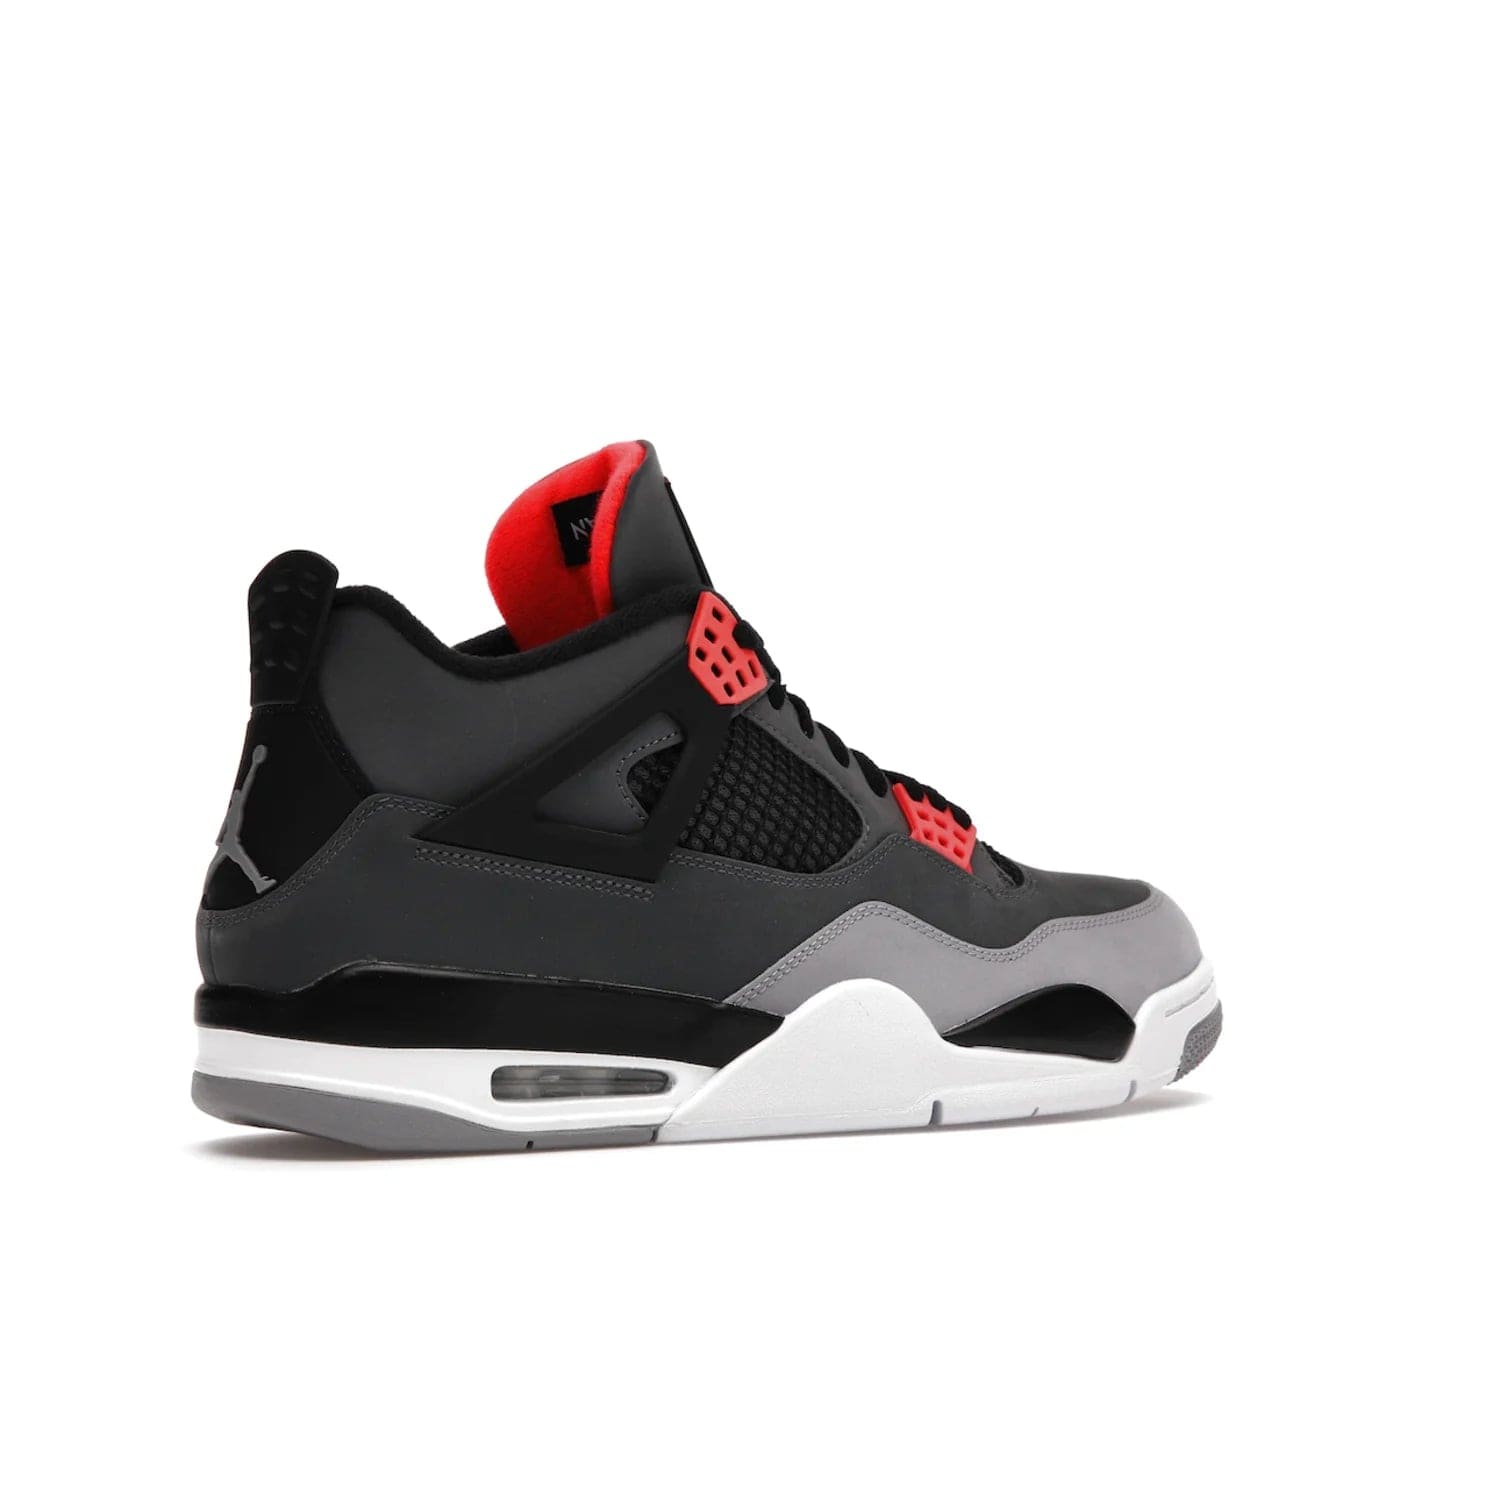 Jordan 4 Retro Infrared - Image 34 - Only at www.BallersClubKickz.com - Introducing the classic & timeless Air Jordan 4 Infrared. Durabuck upper, TPU mesh inserts, tech straps & heel tabs in dark grey and infrared accents. White sole with visible Air units. Out June 15, 2022. Get your pair now!